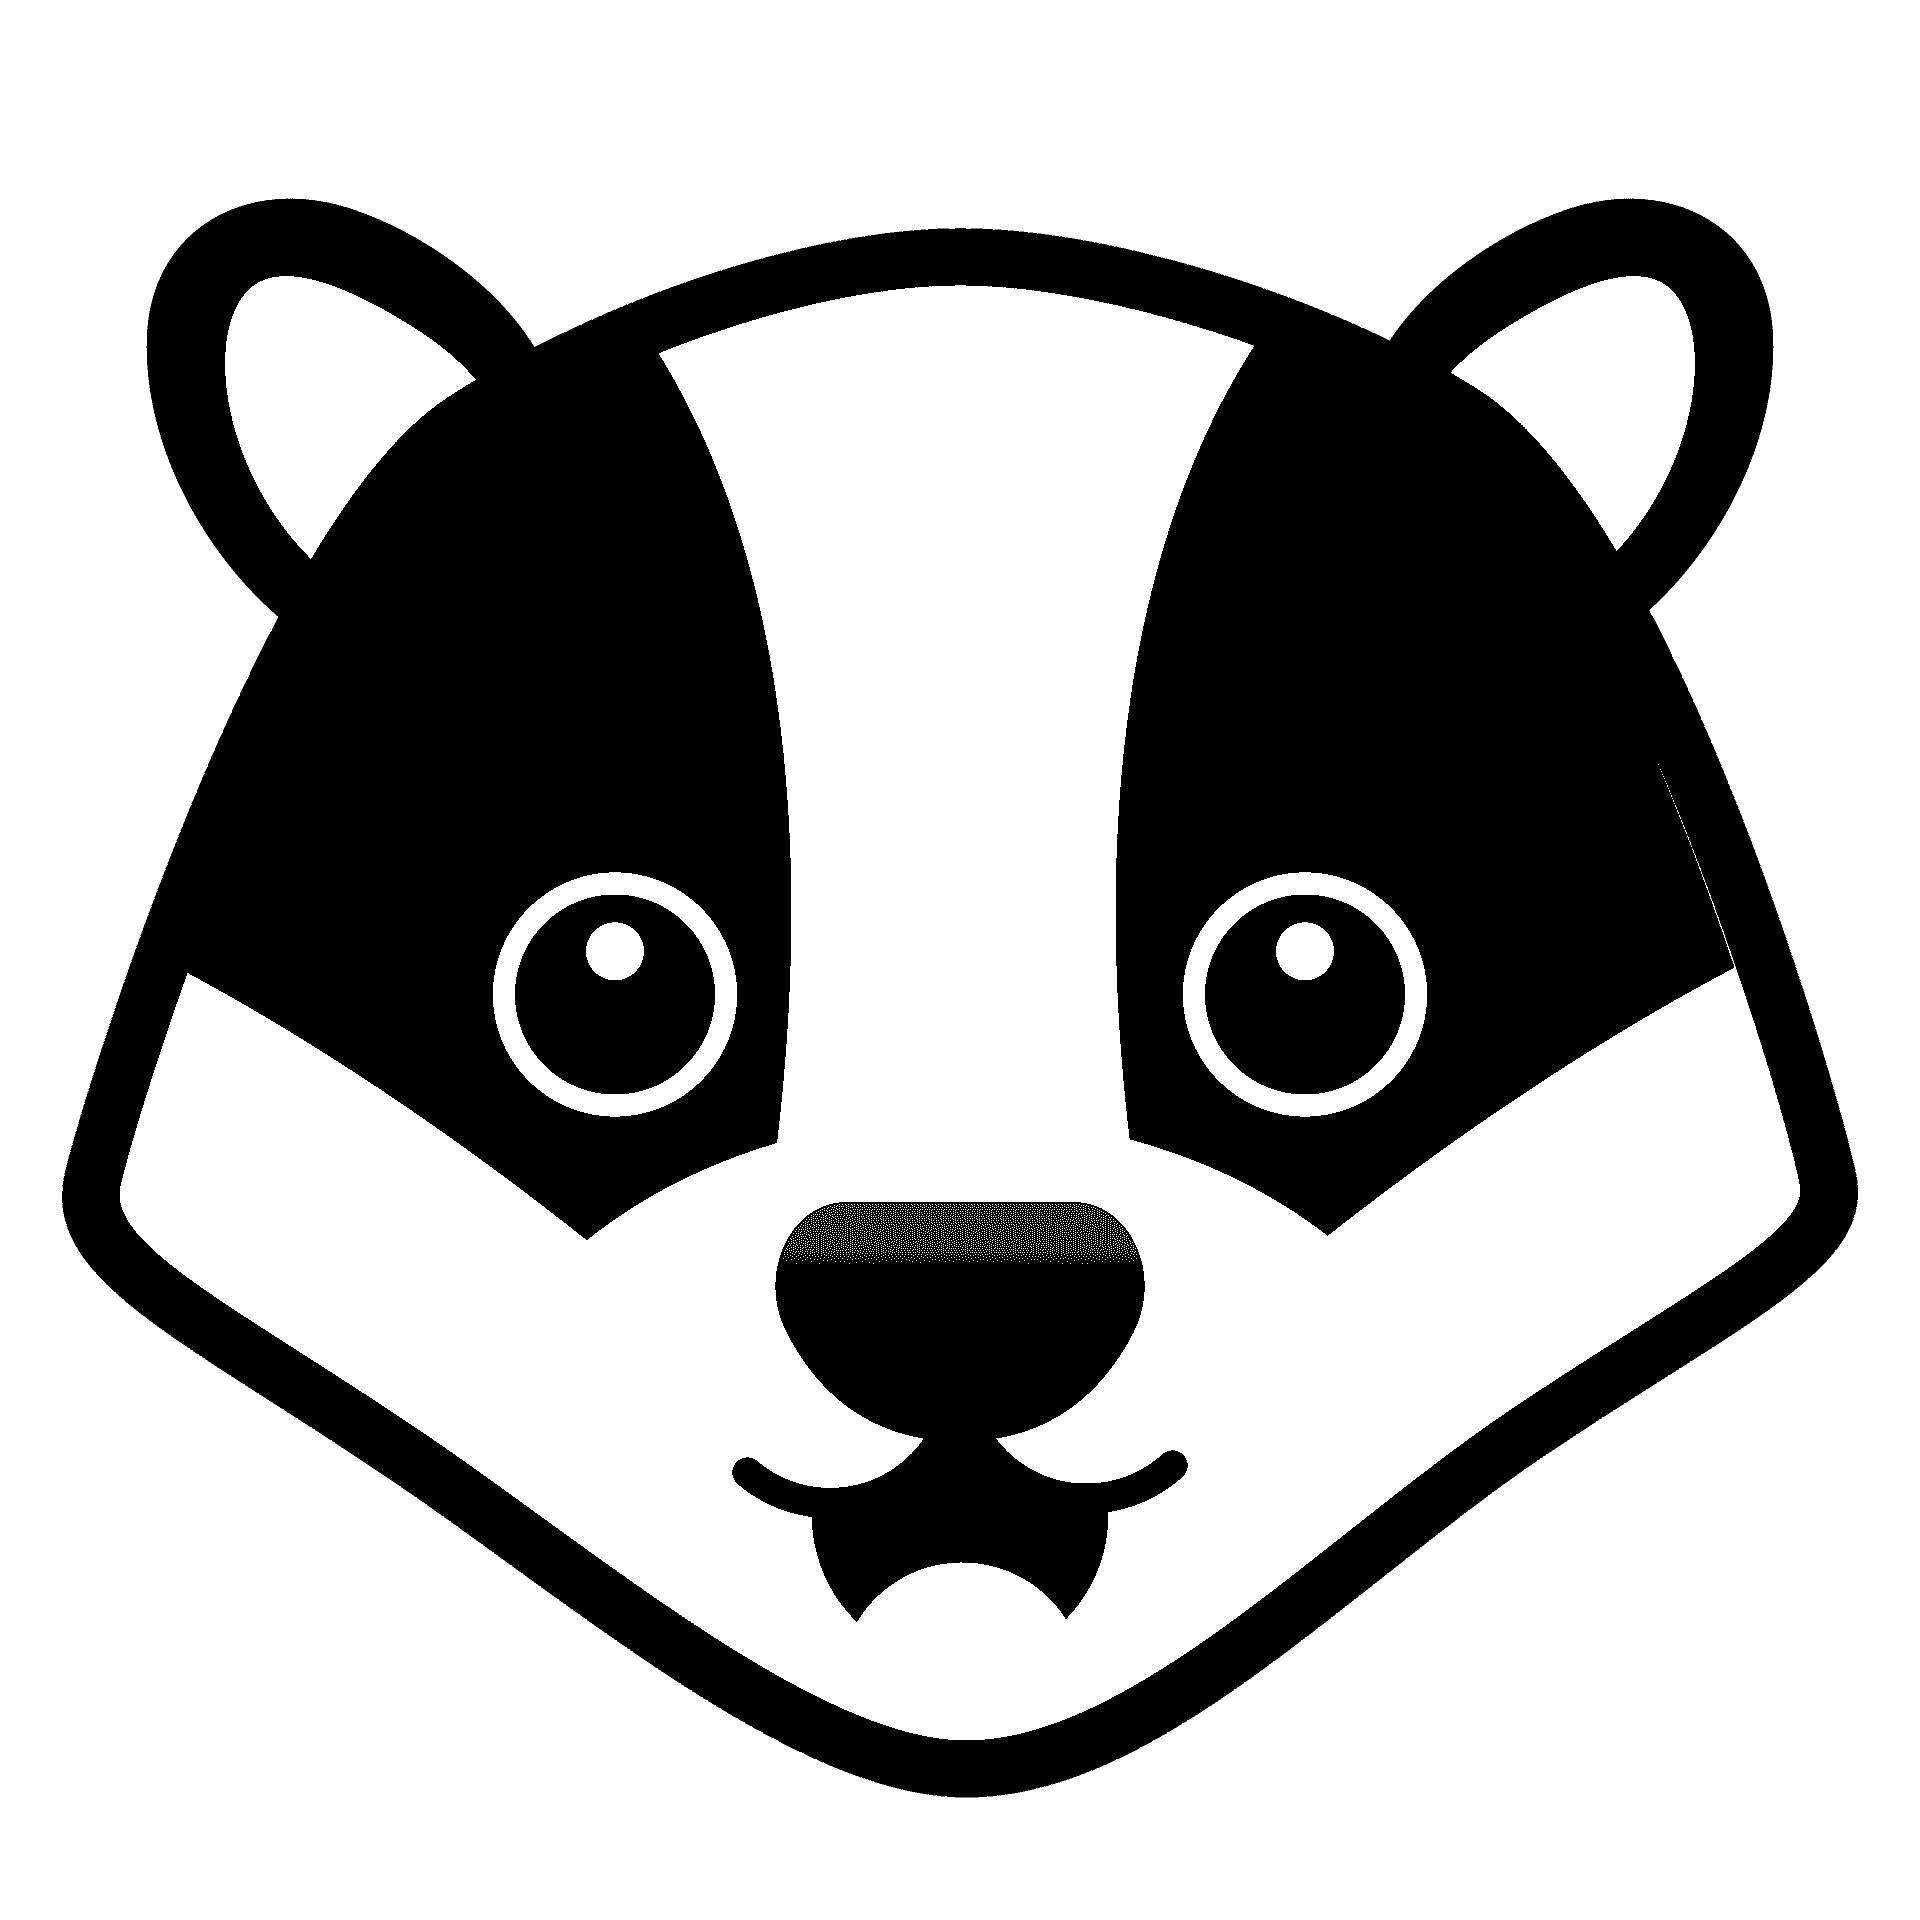 Coloring page of a badger (Meles meles)